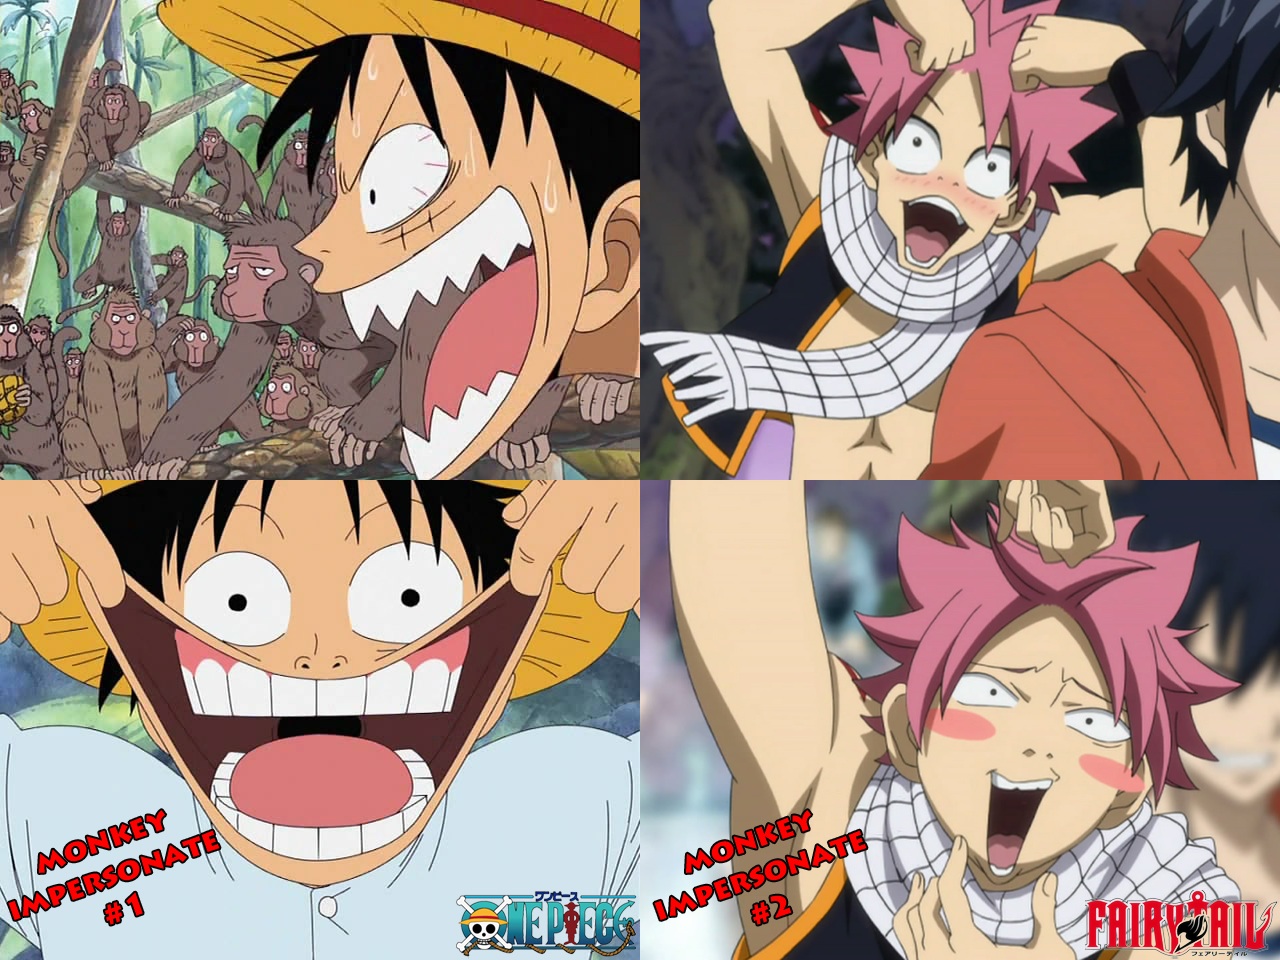 Anime loverz Photo: Fairy tail and one piece.